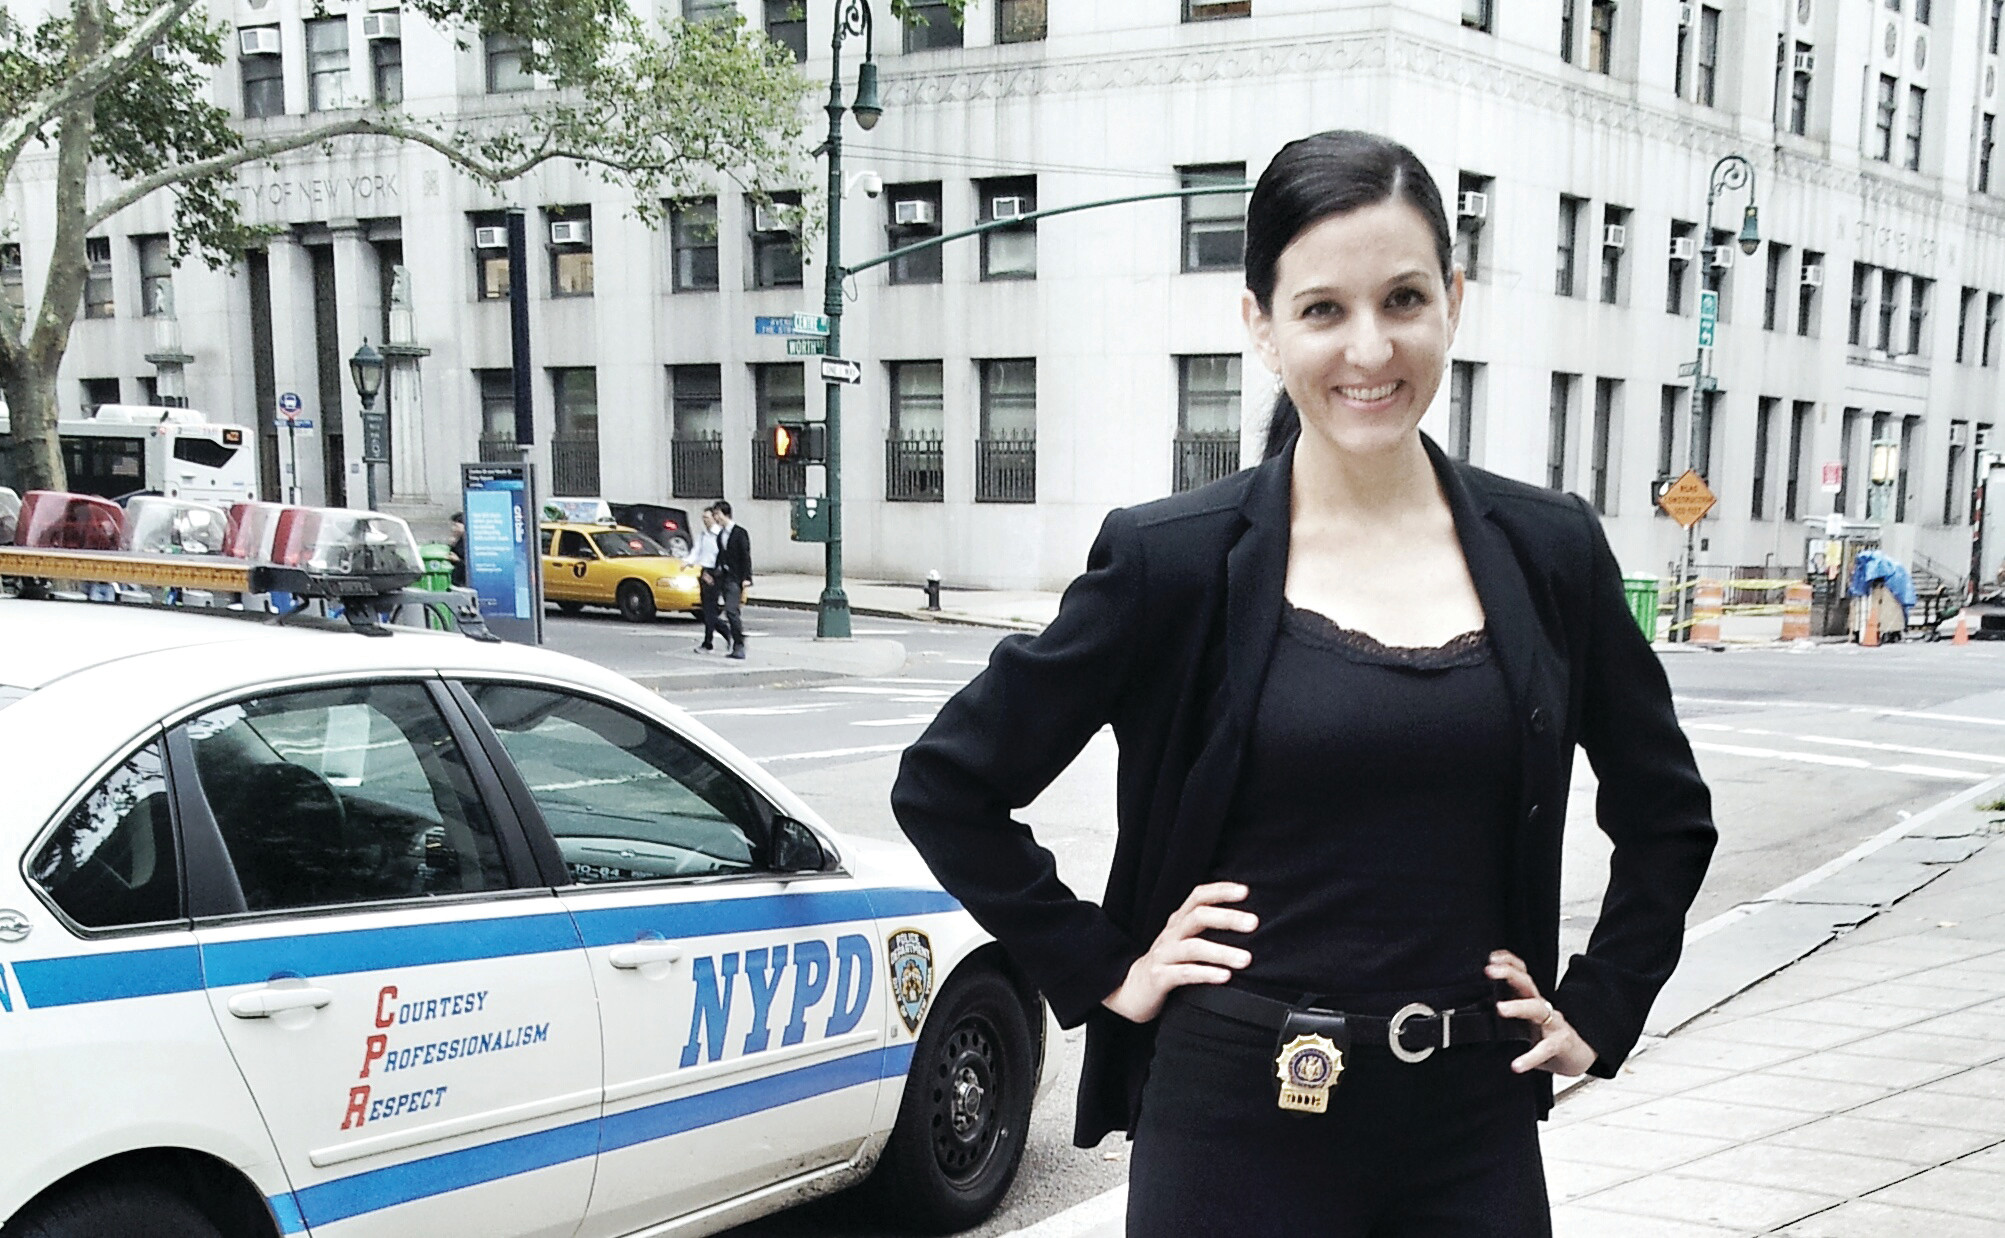 Kelly P. Williams poses for a quick picture while on set for the CBS television crime drama series “Blue Bloods.”